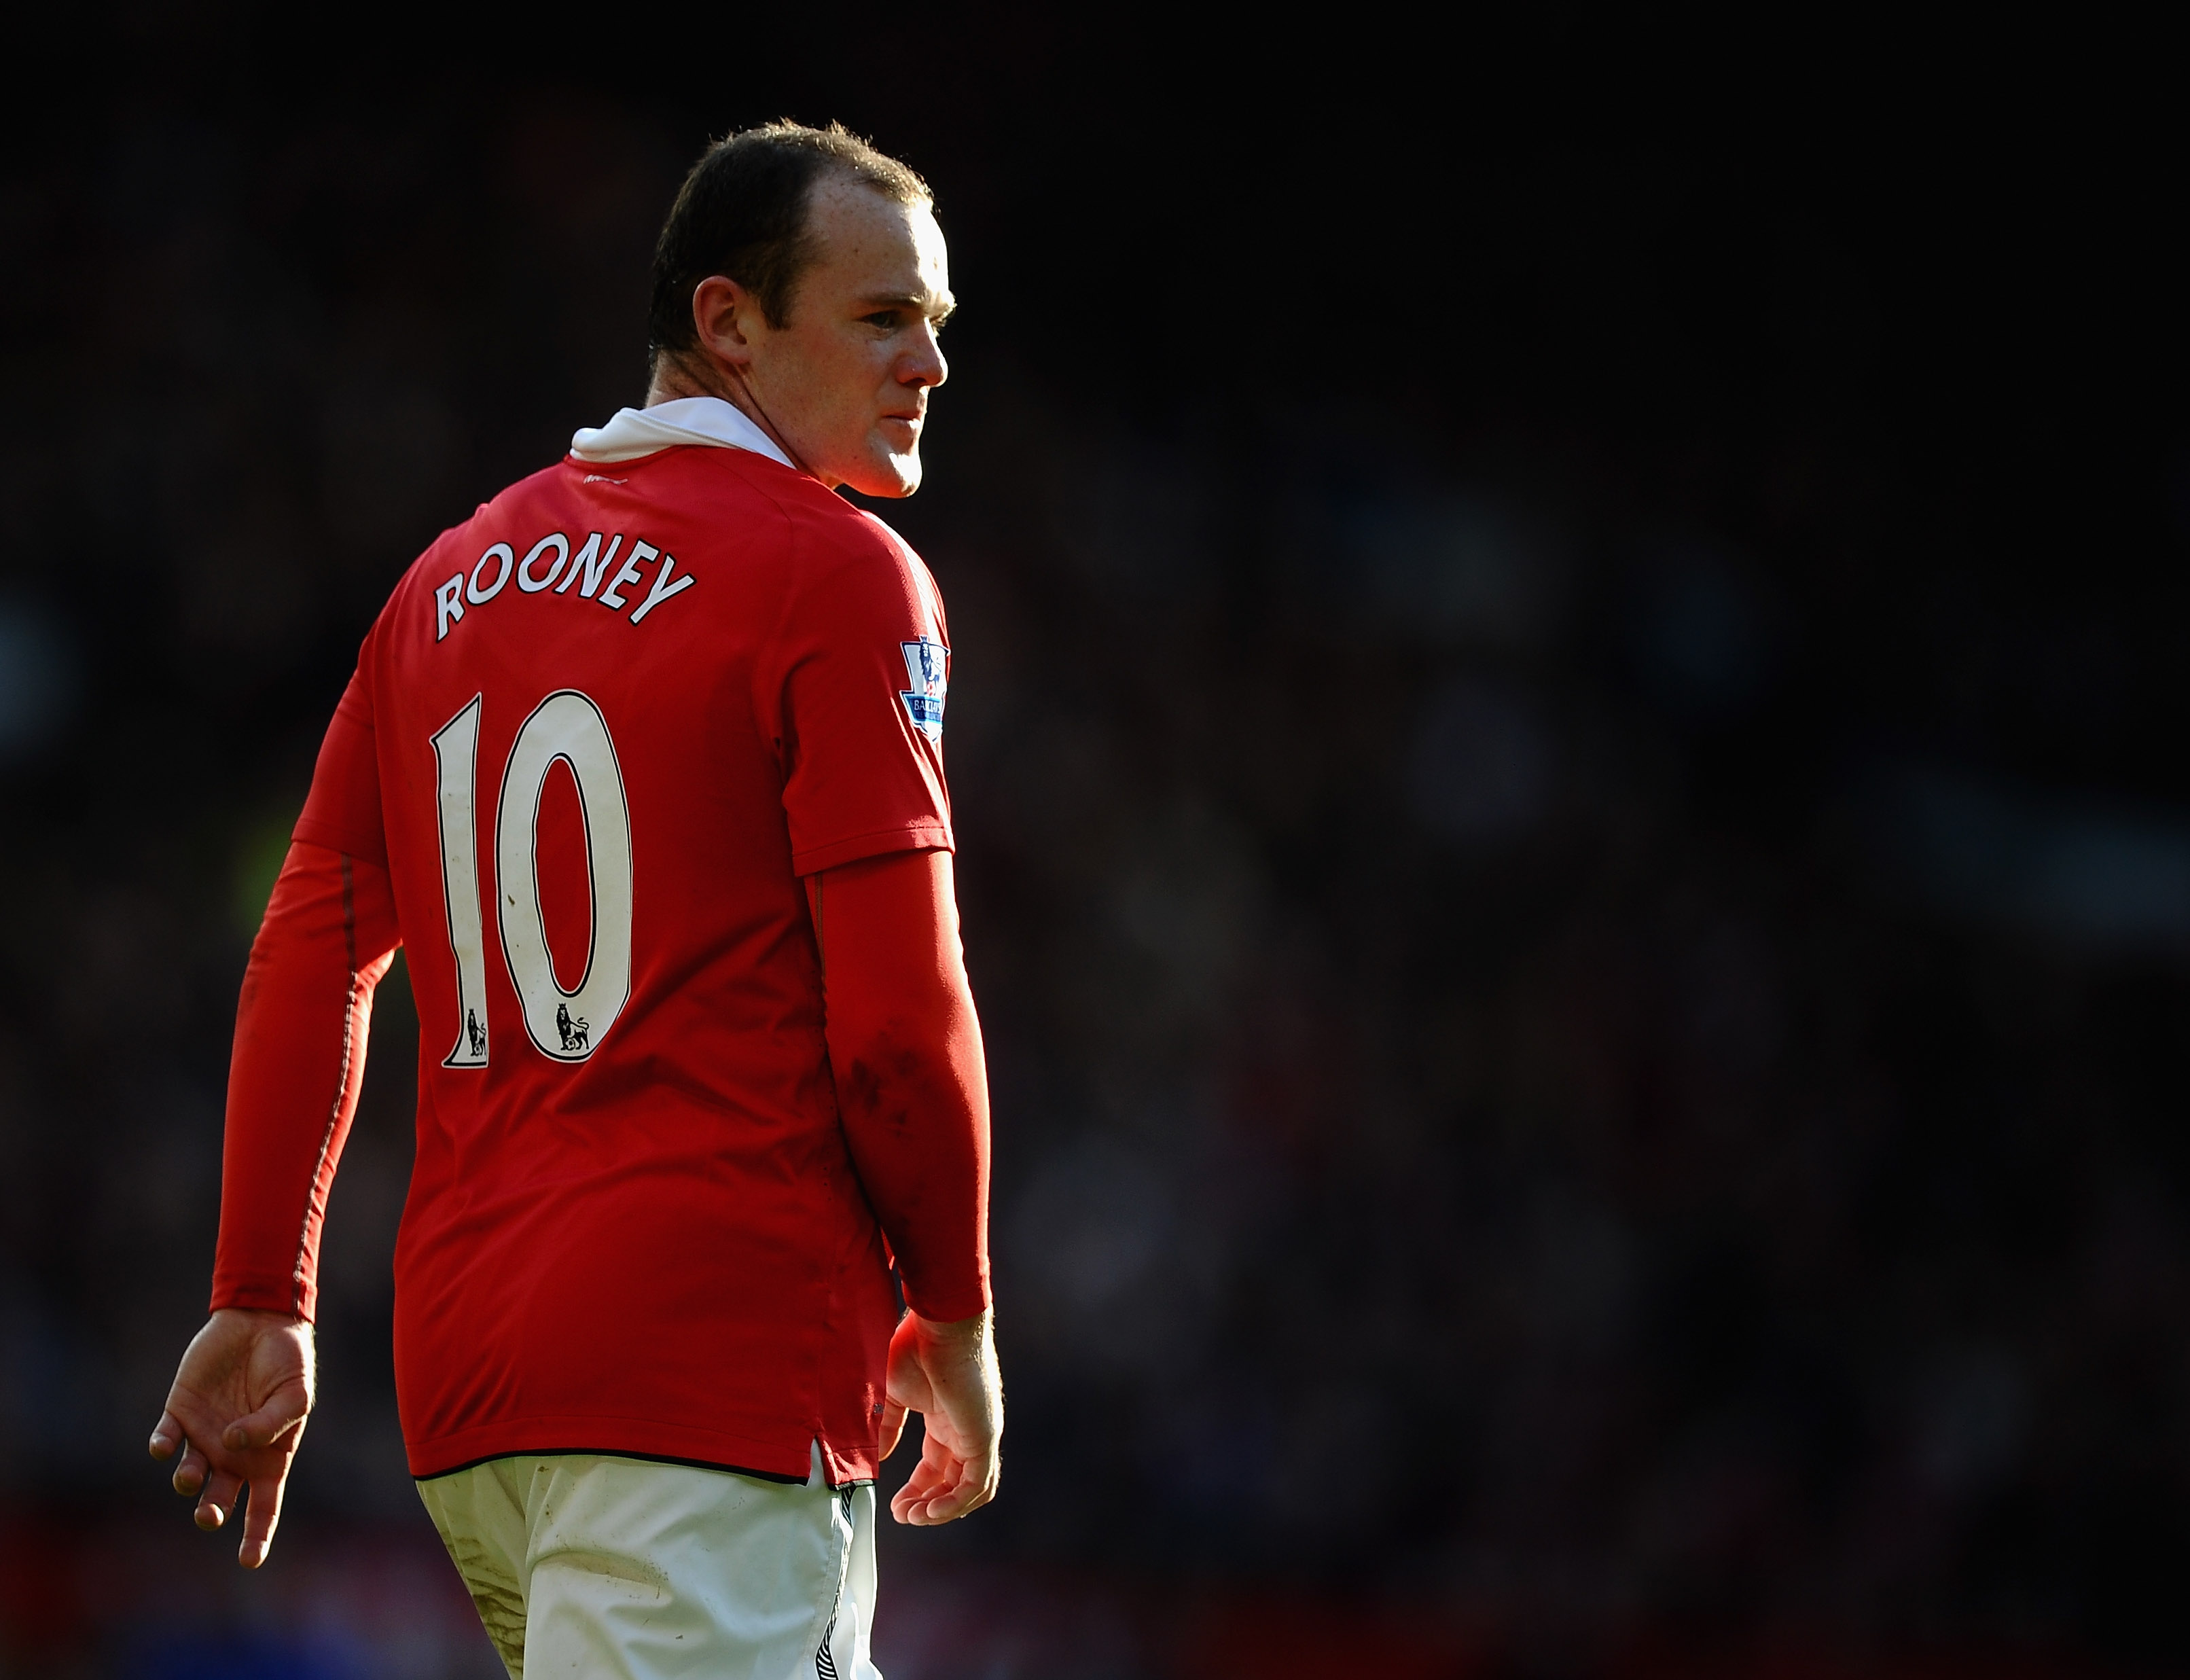 MANCHESTER, ENGLAND - MARCH 19: Wayne Rooney of Manchester United looks on during the Barclays Premier League match between Manchester United and Bolton Wanderers at Old Trafford on March 19, 2011 in Manchester, England.  (Photo by Laurence Griffiths/Gett